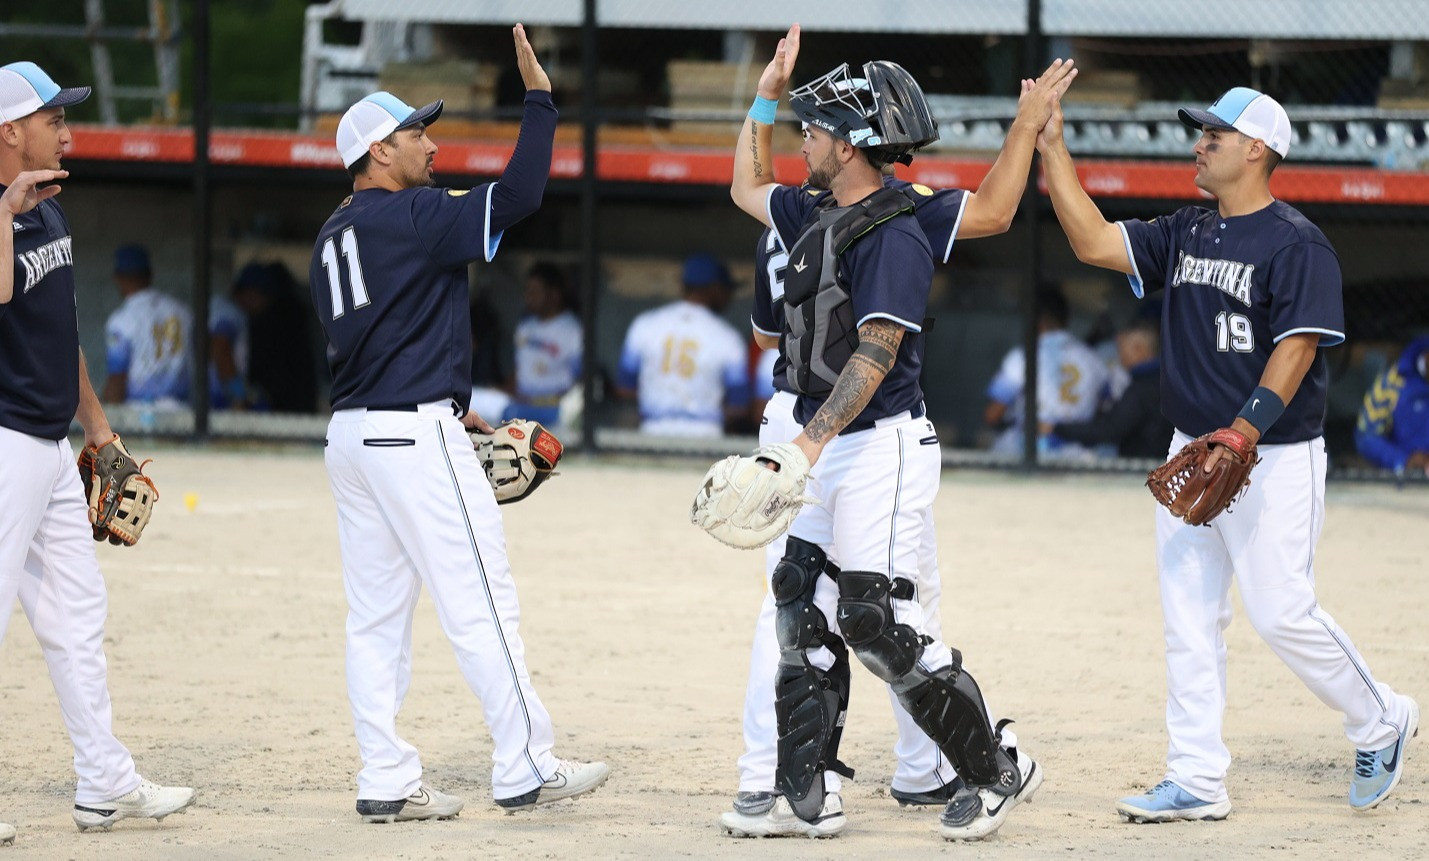 Argentina is set to host the WBSC Men's Under-23 Softball World Cup from April 15 to 23 2023 ©WBSC